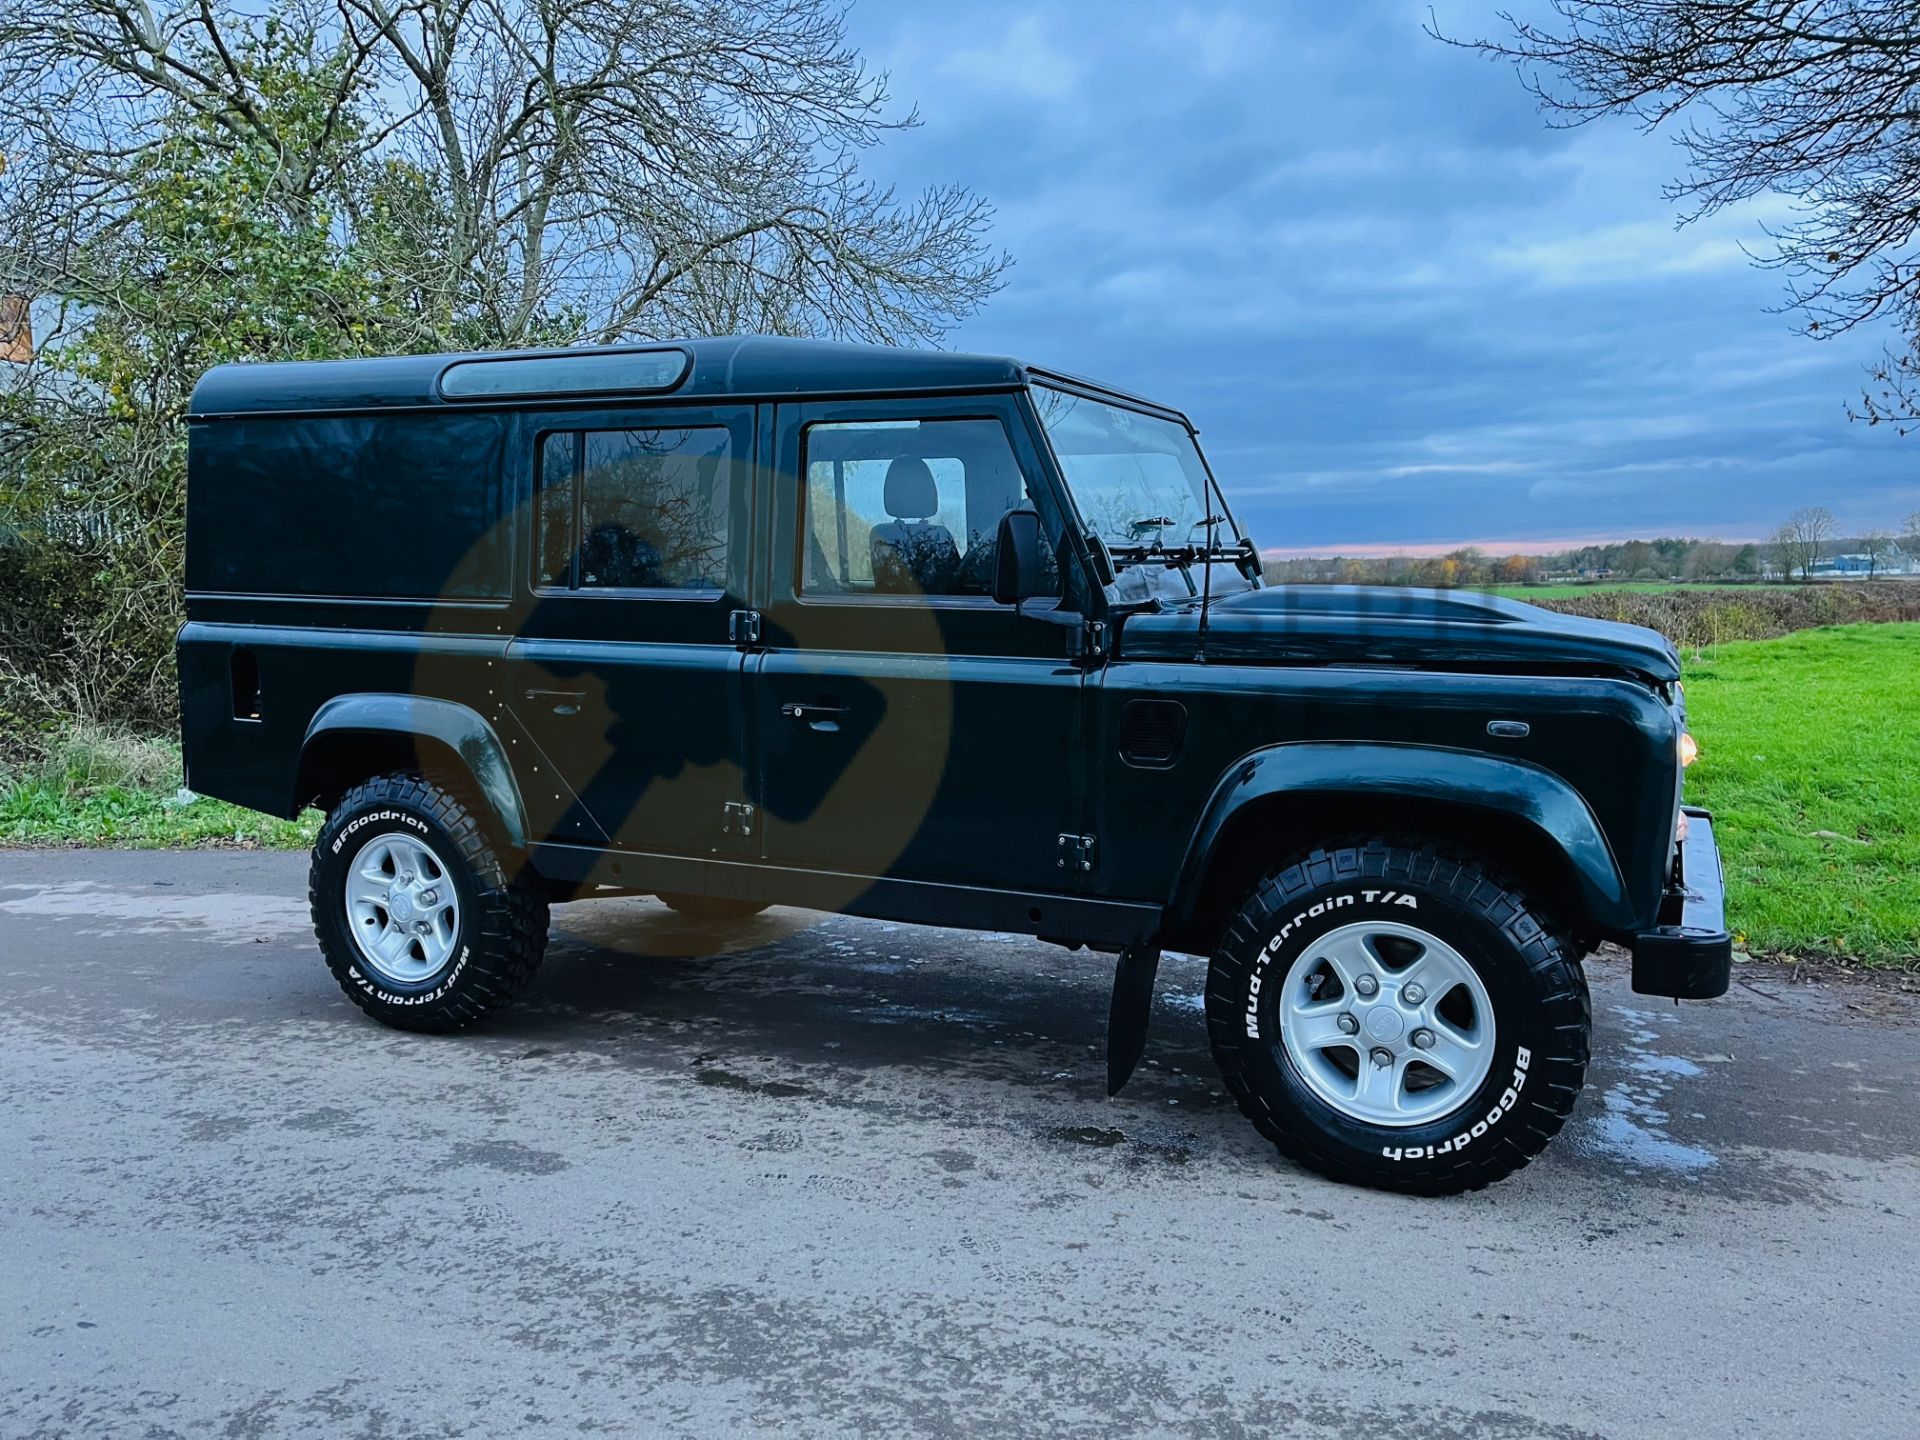 (ON SALE) LAND ROVER DEFENDER 110 2.2TDCI "COUNTY-UTILITY WAGON" (2016 MODEL) 37000 MILES LR HISTORY